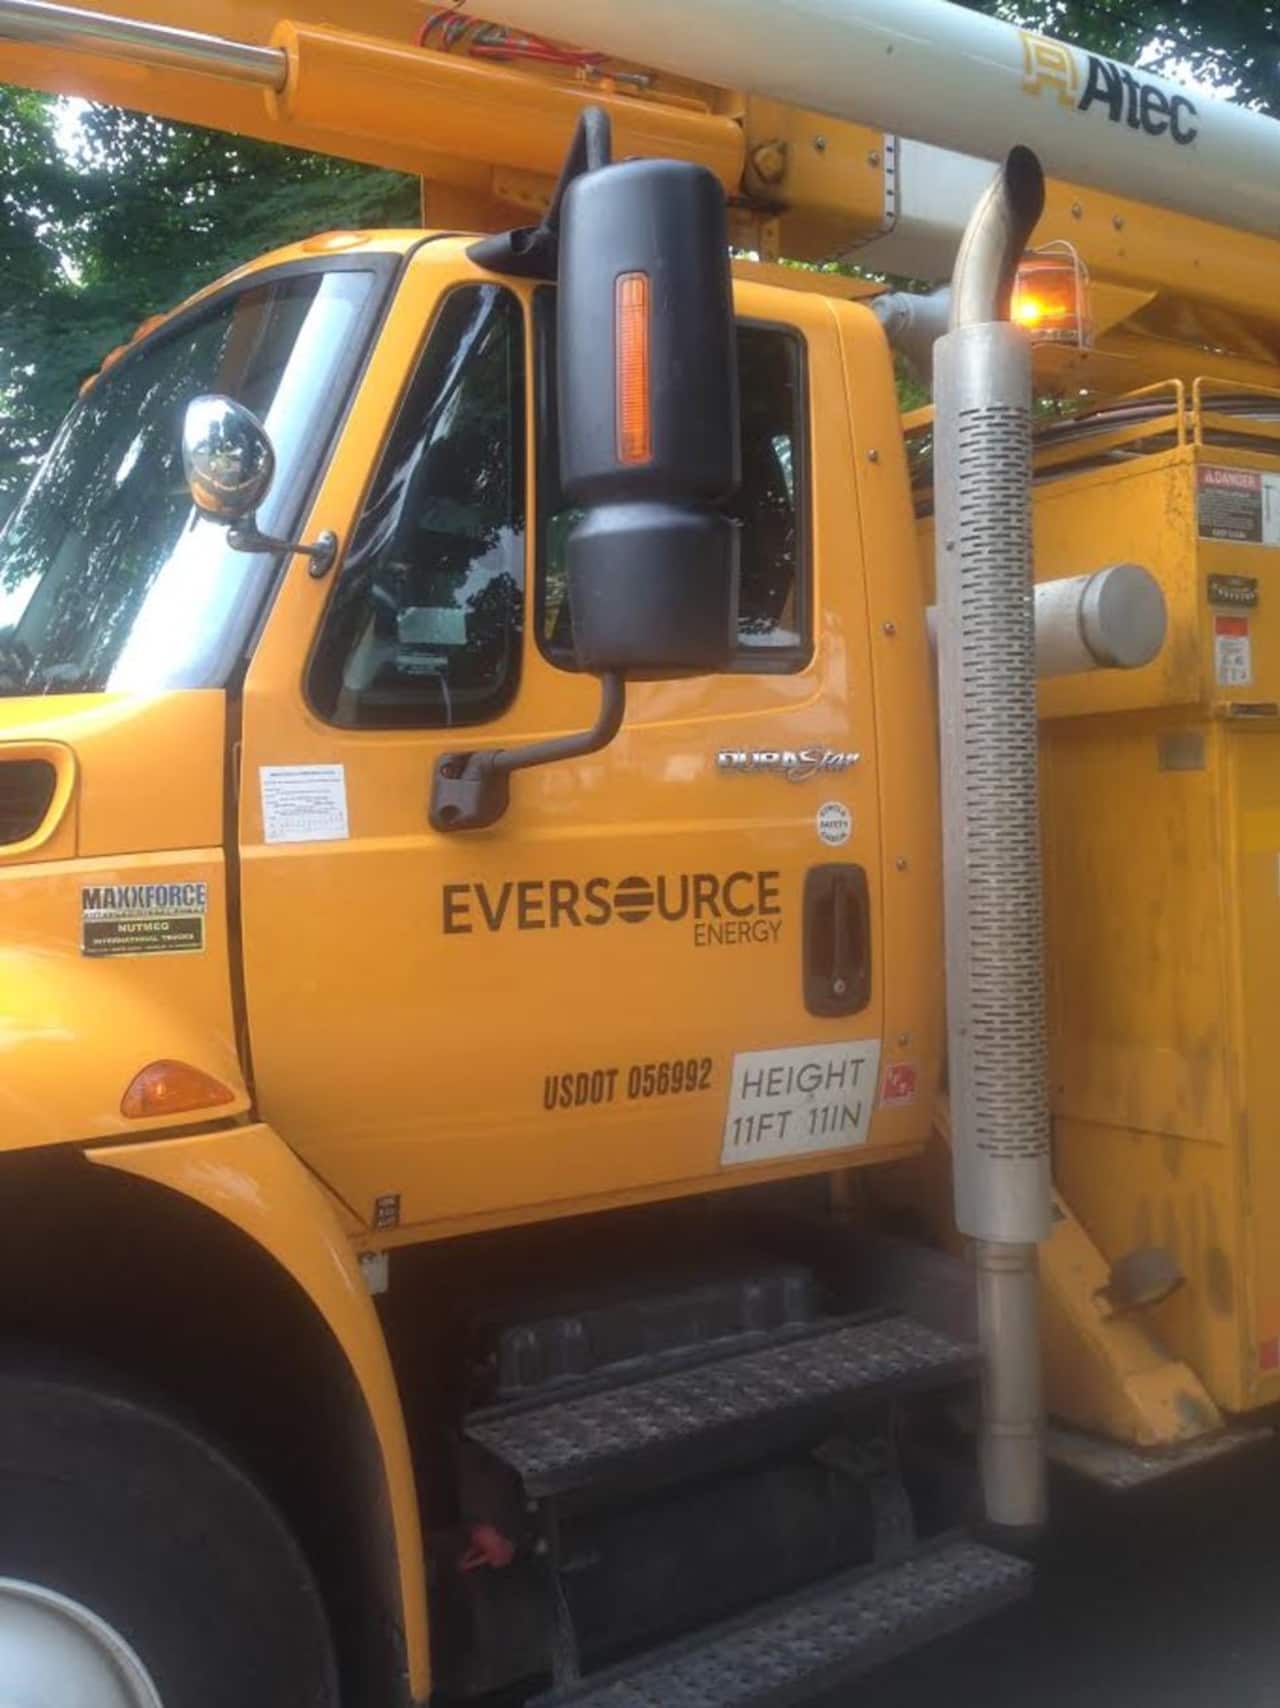 Eversource is on the scene of power outages in Fairfield County on Friday.